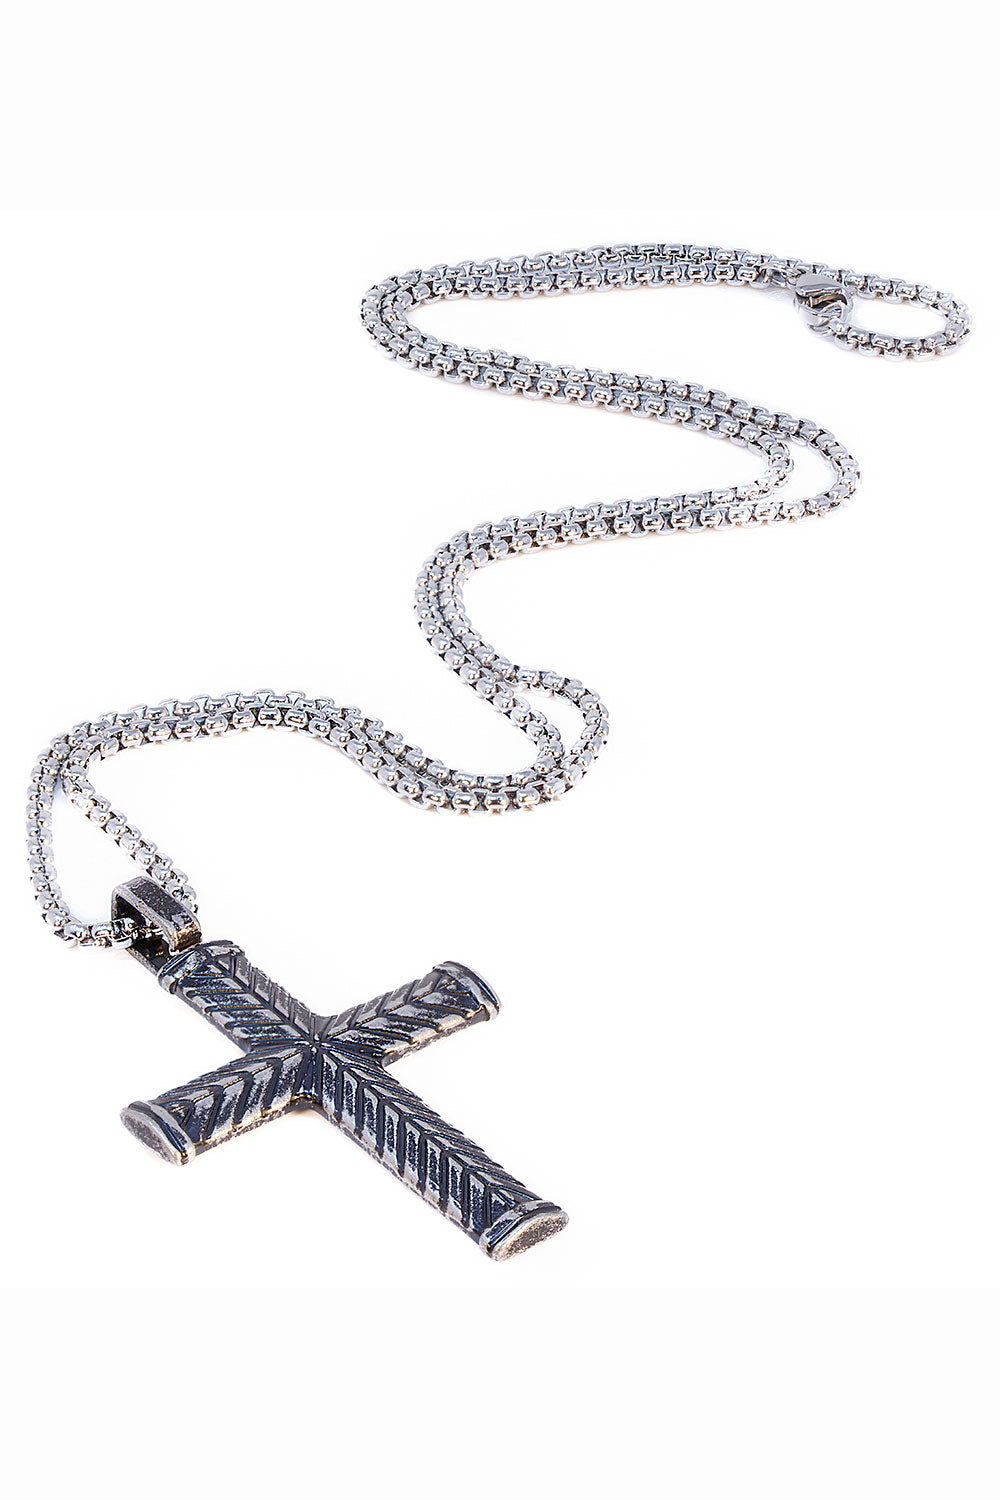 Barabas Unisex Stainless Steel Patterned Cross Pendant Necklace 4NK01 Black Silver